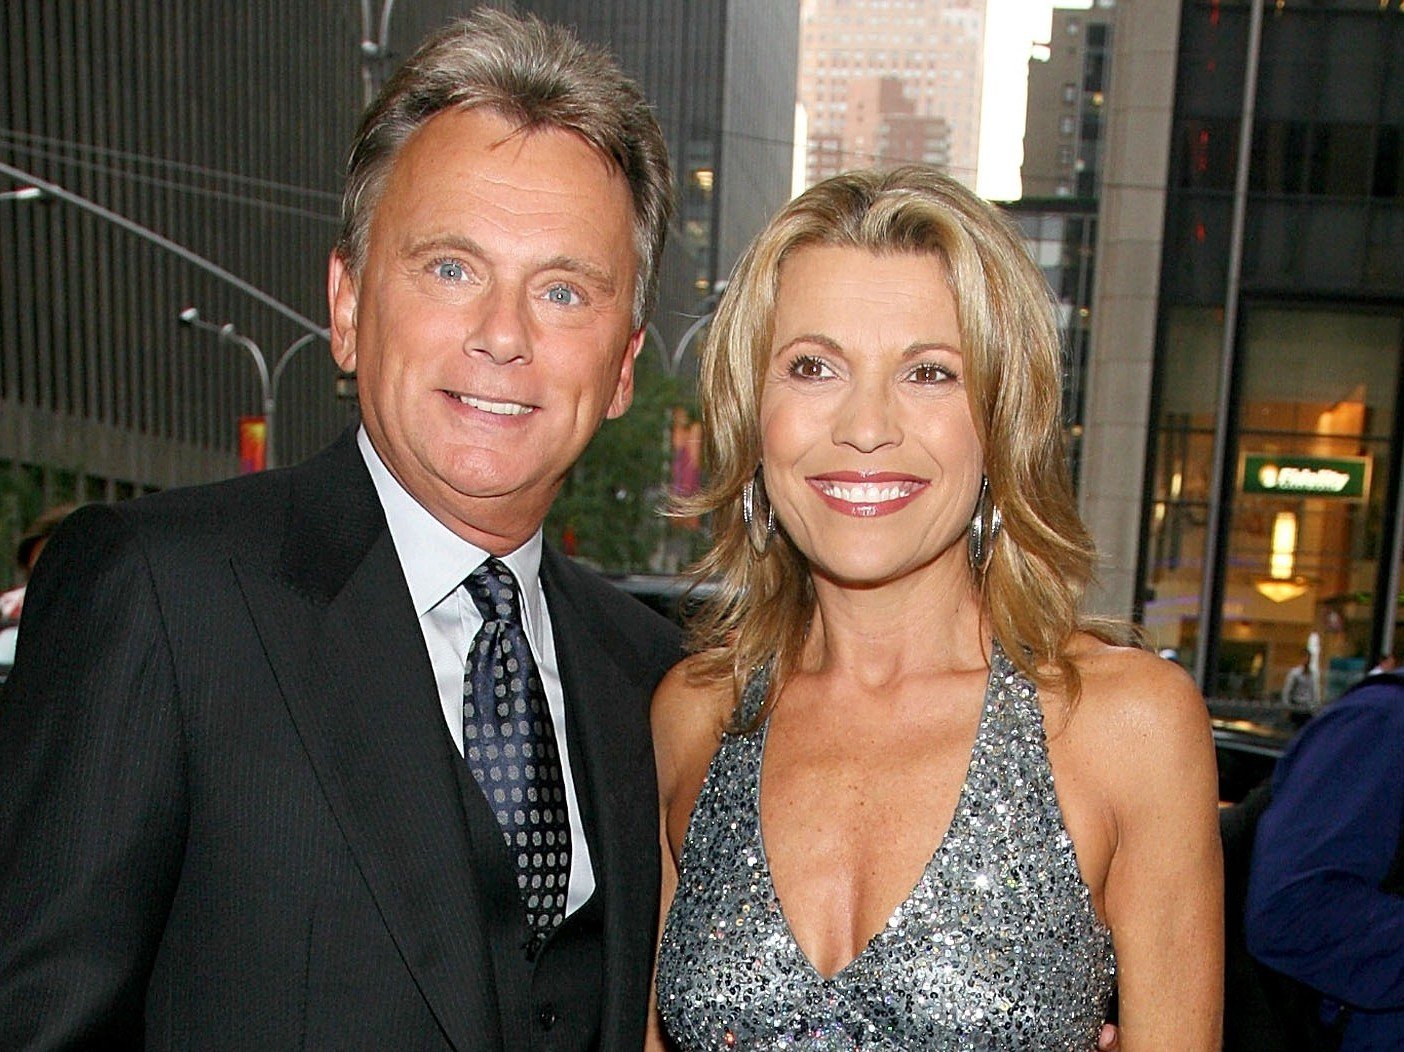 Pat Sajak Getting Called Out (Again) For Latest Faux Pas Against Vanna White